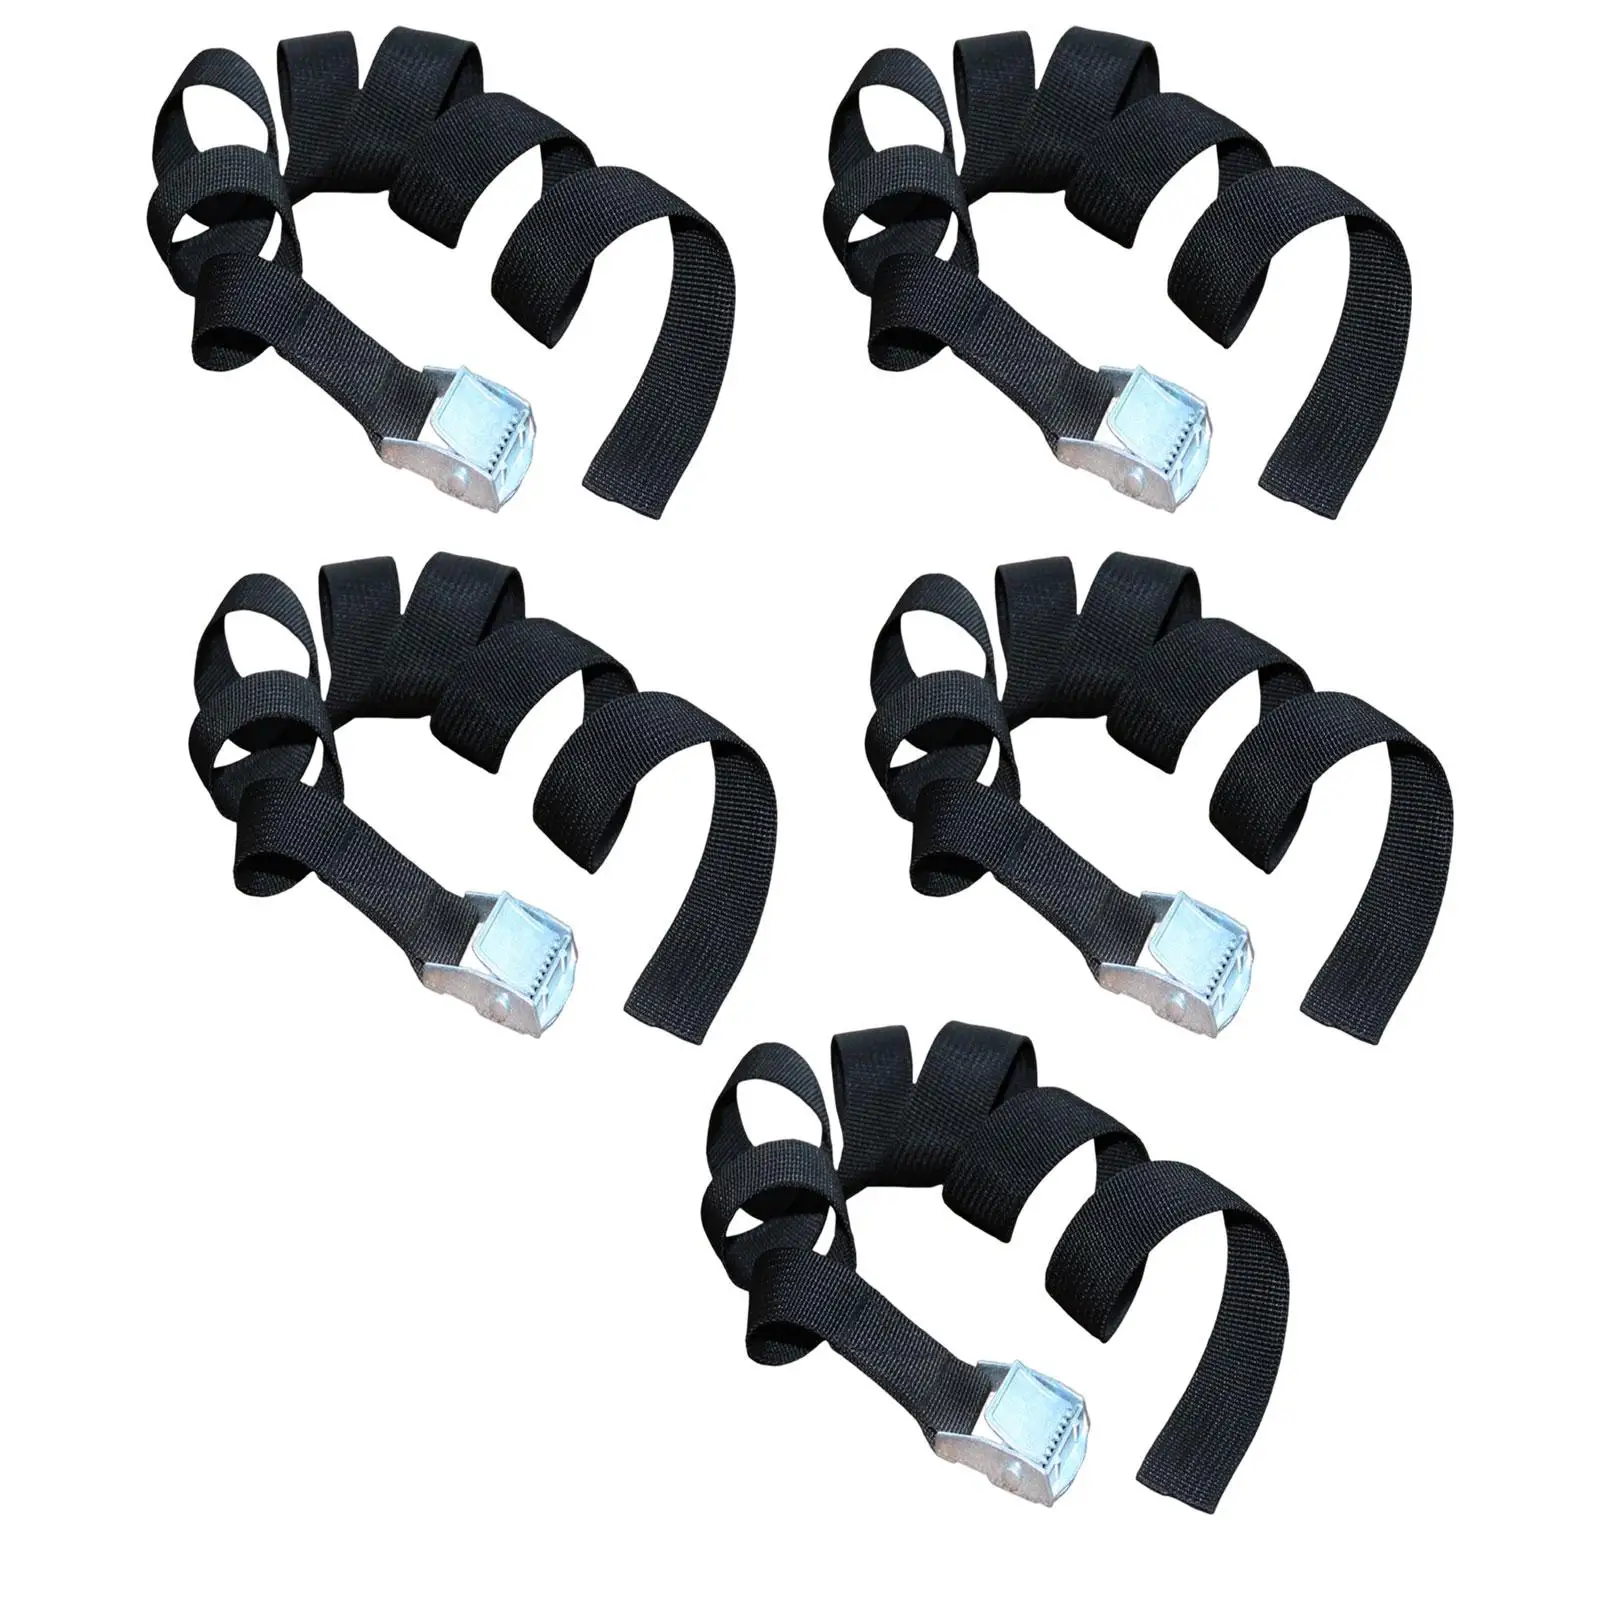 5Pcs Tie Down Strap, with Buckle Lashing Strap Tensioning Belt Cord Cargo Heavy